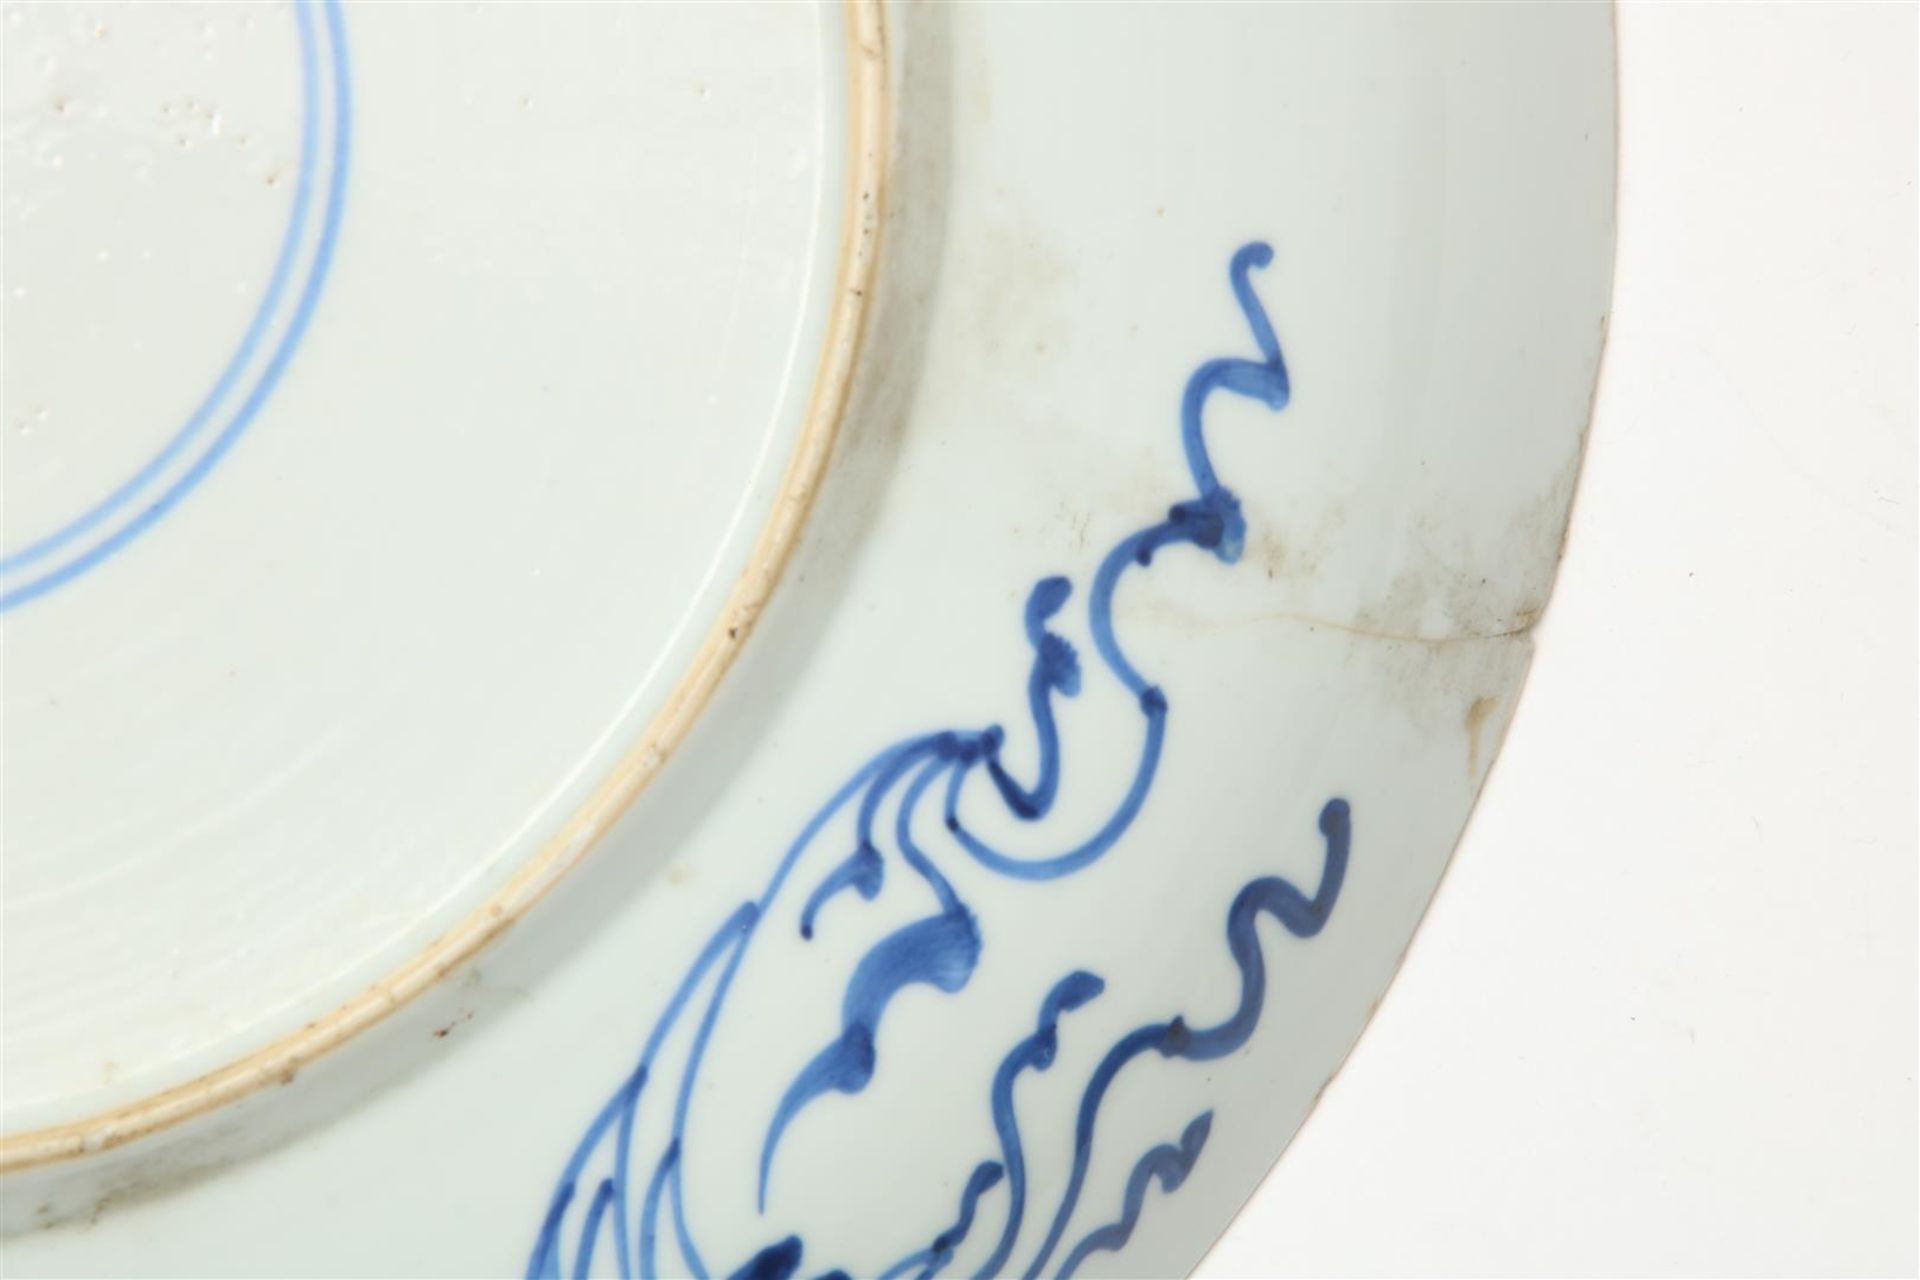 Porcelain Kangxi dish with Aster pattern decor, mark with Artemisia leaf, China 18th century, - Image 4 of 4